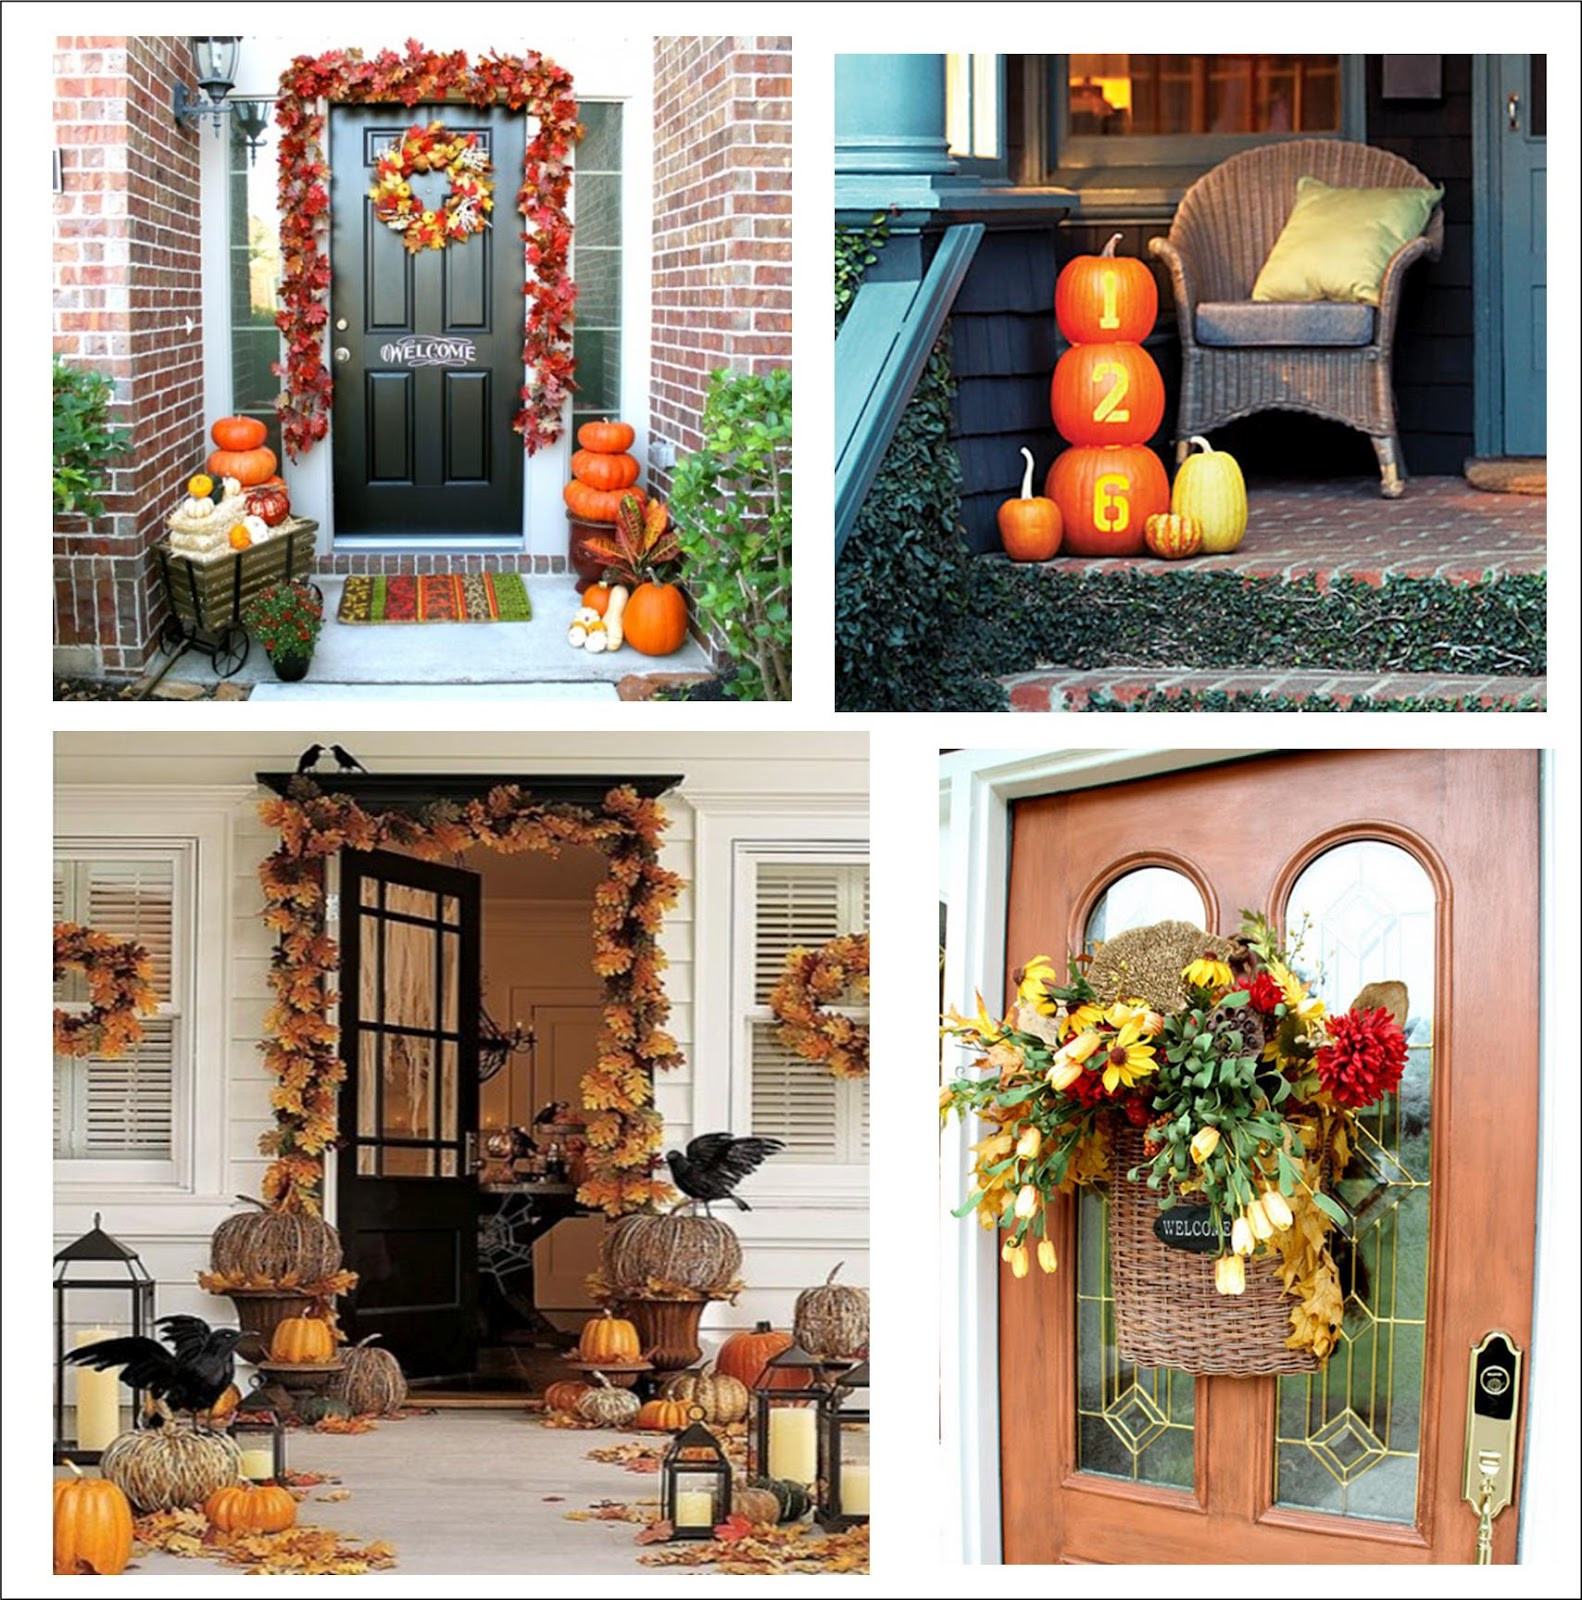 Outside Fall Decor Ideas
 It s Written on the Wall 90 Fall Porch Decorating Ideas